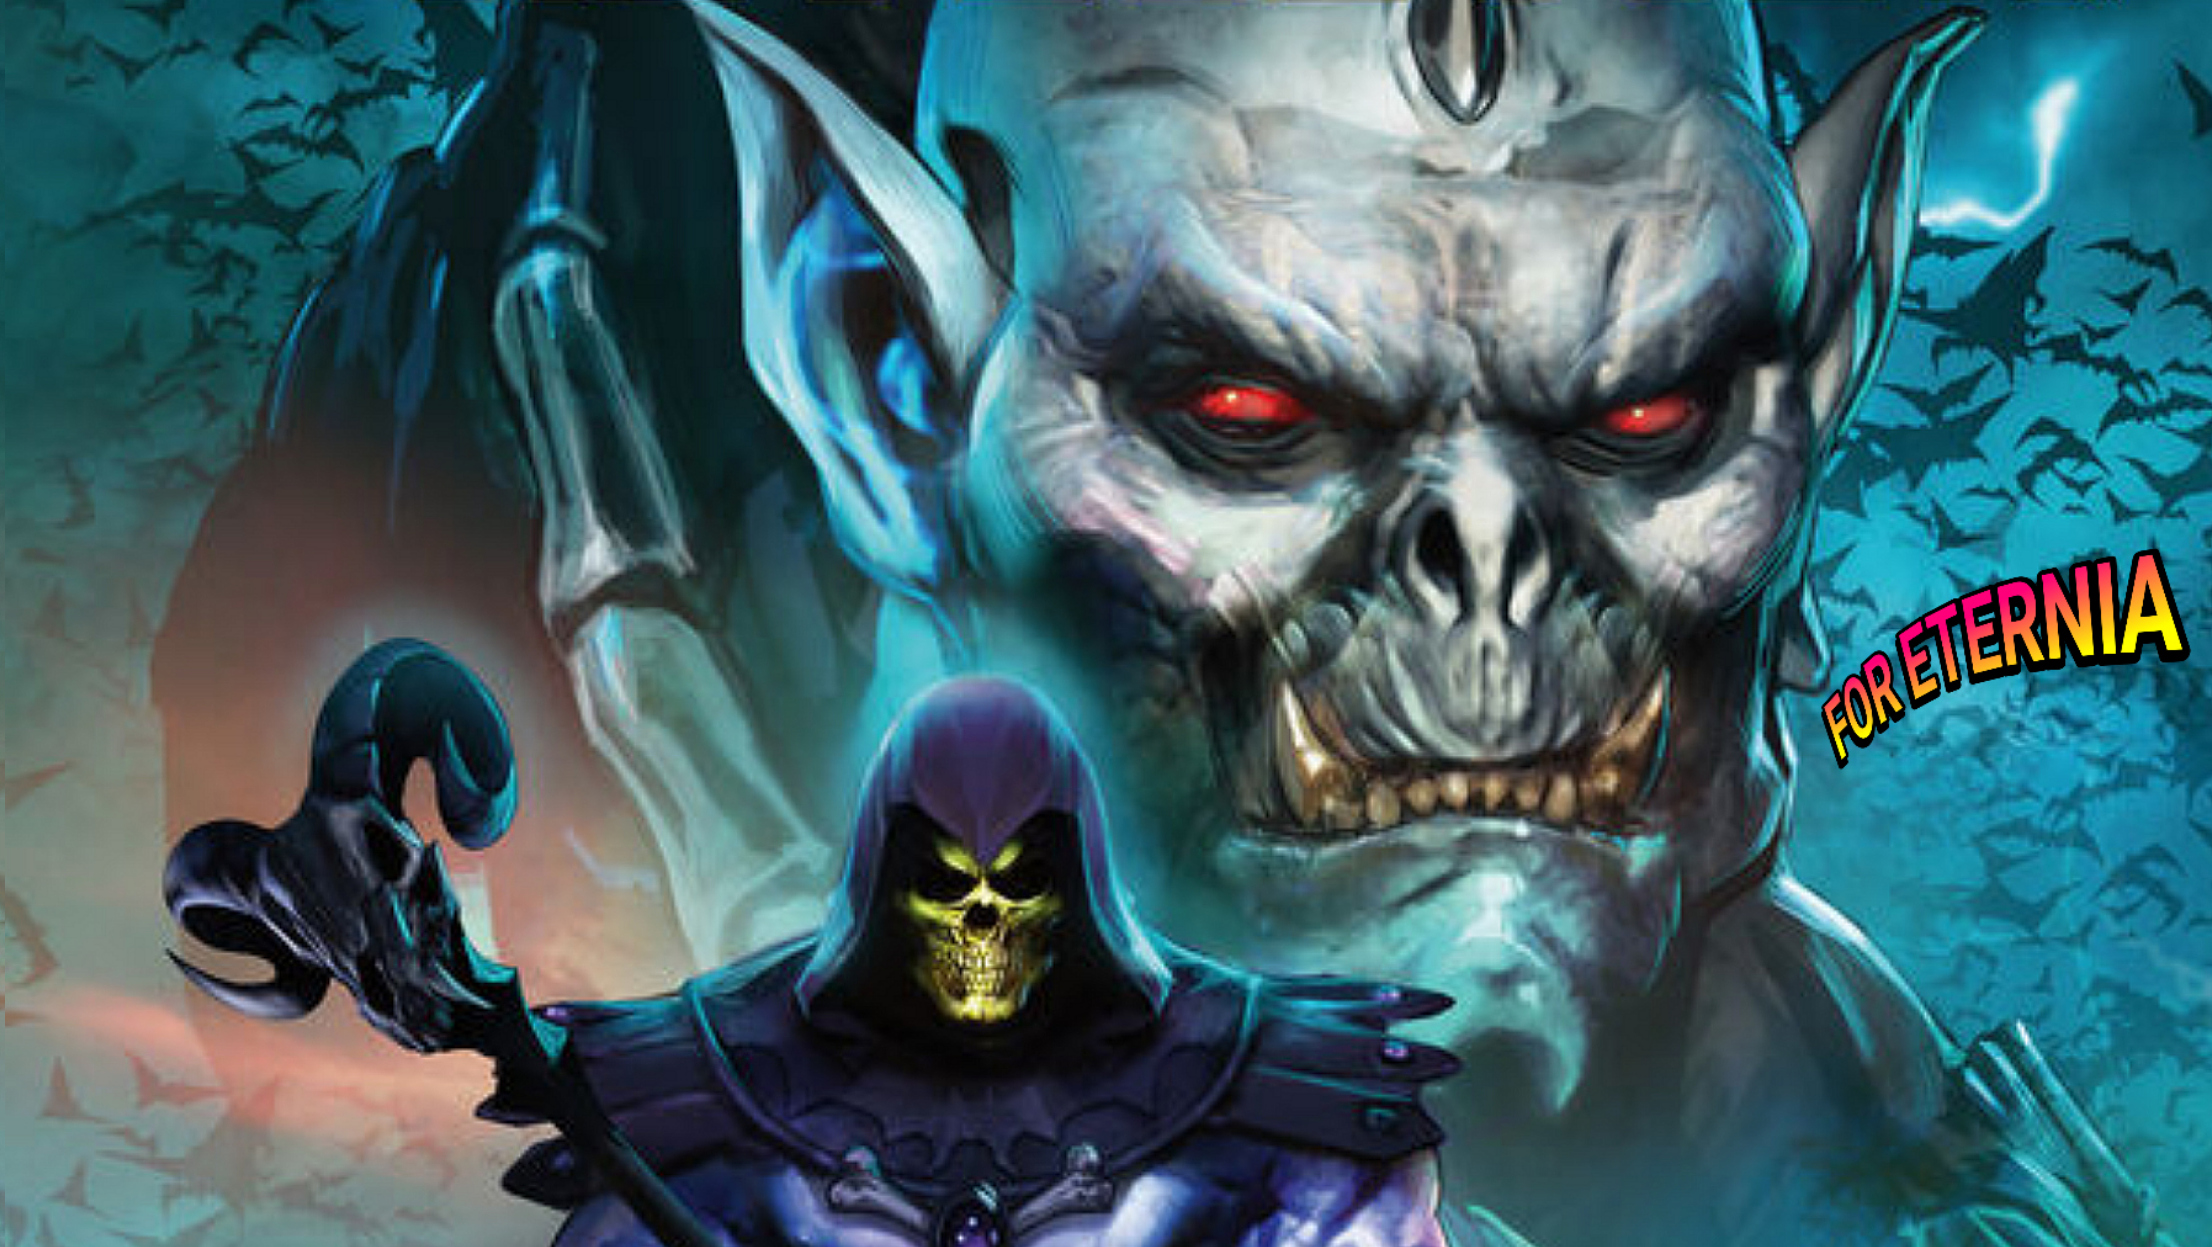 Official Synopsis and Covers for the MASTERS OF THE UNIVERSE: REVOLUTION #4 Prequel Comic are revealed